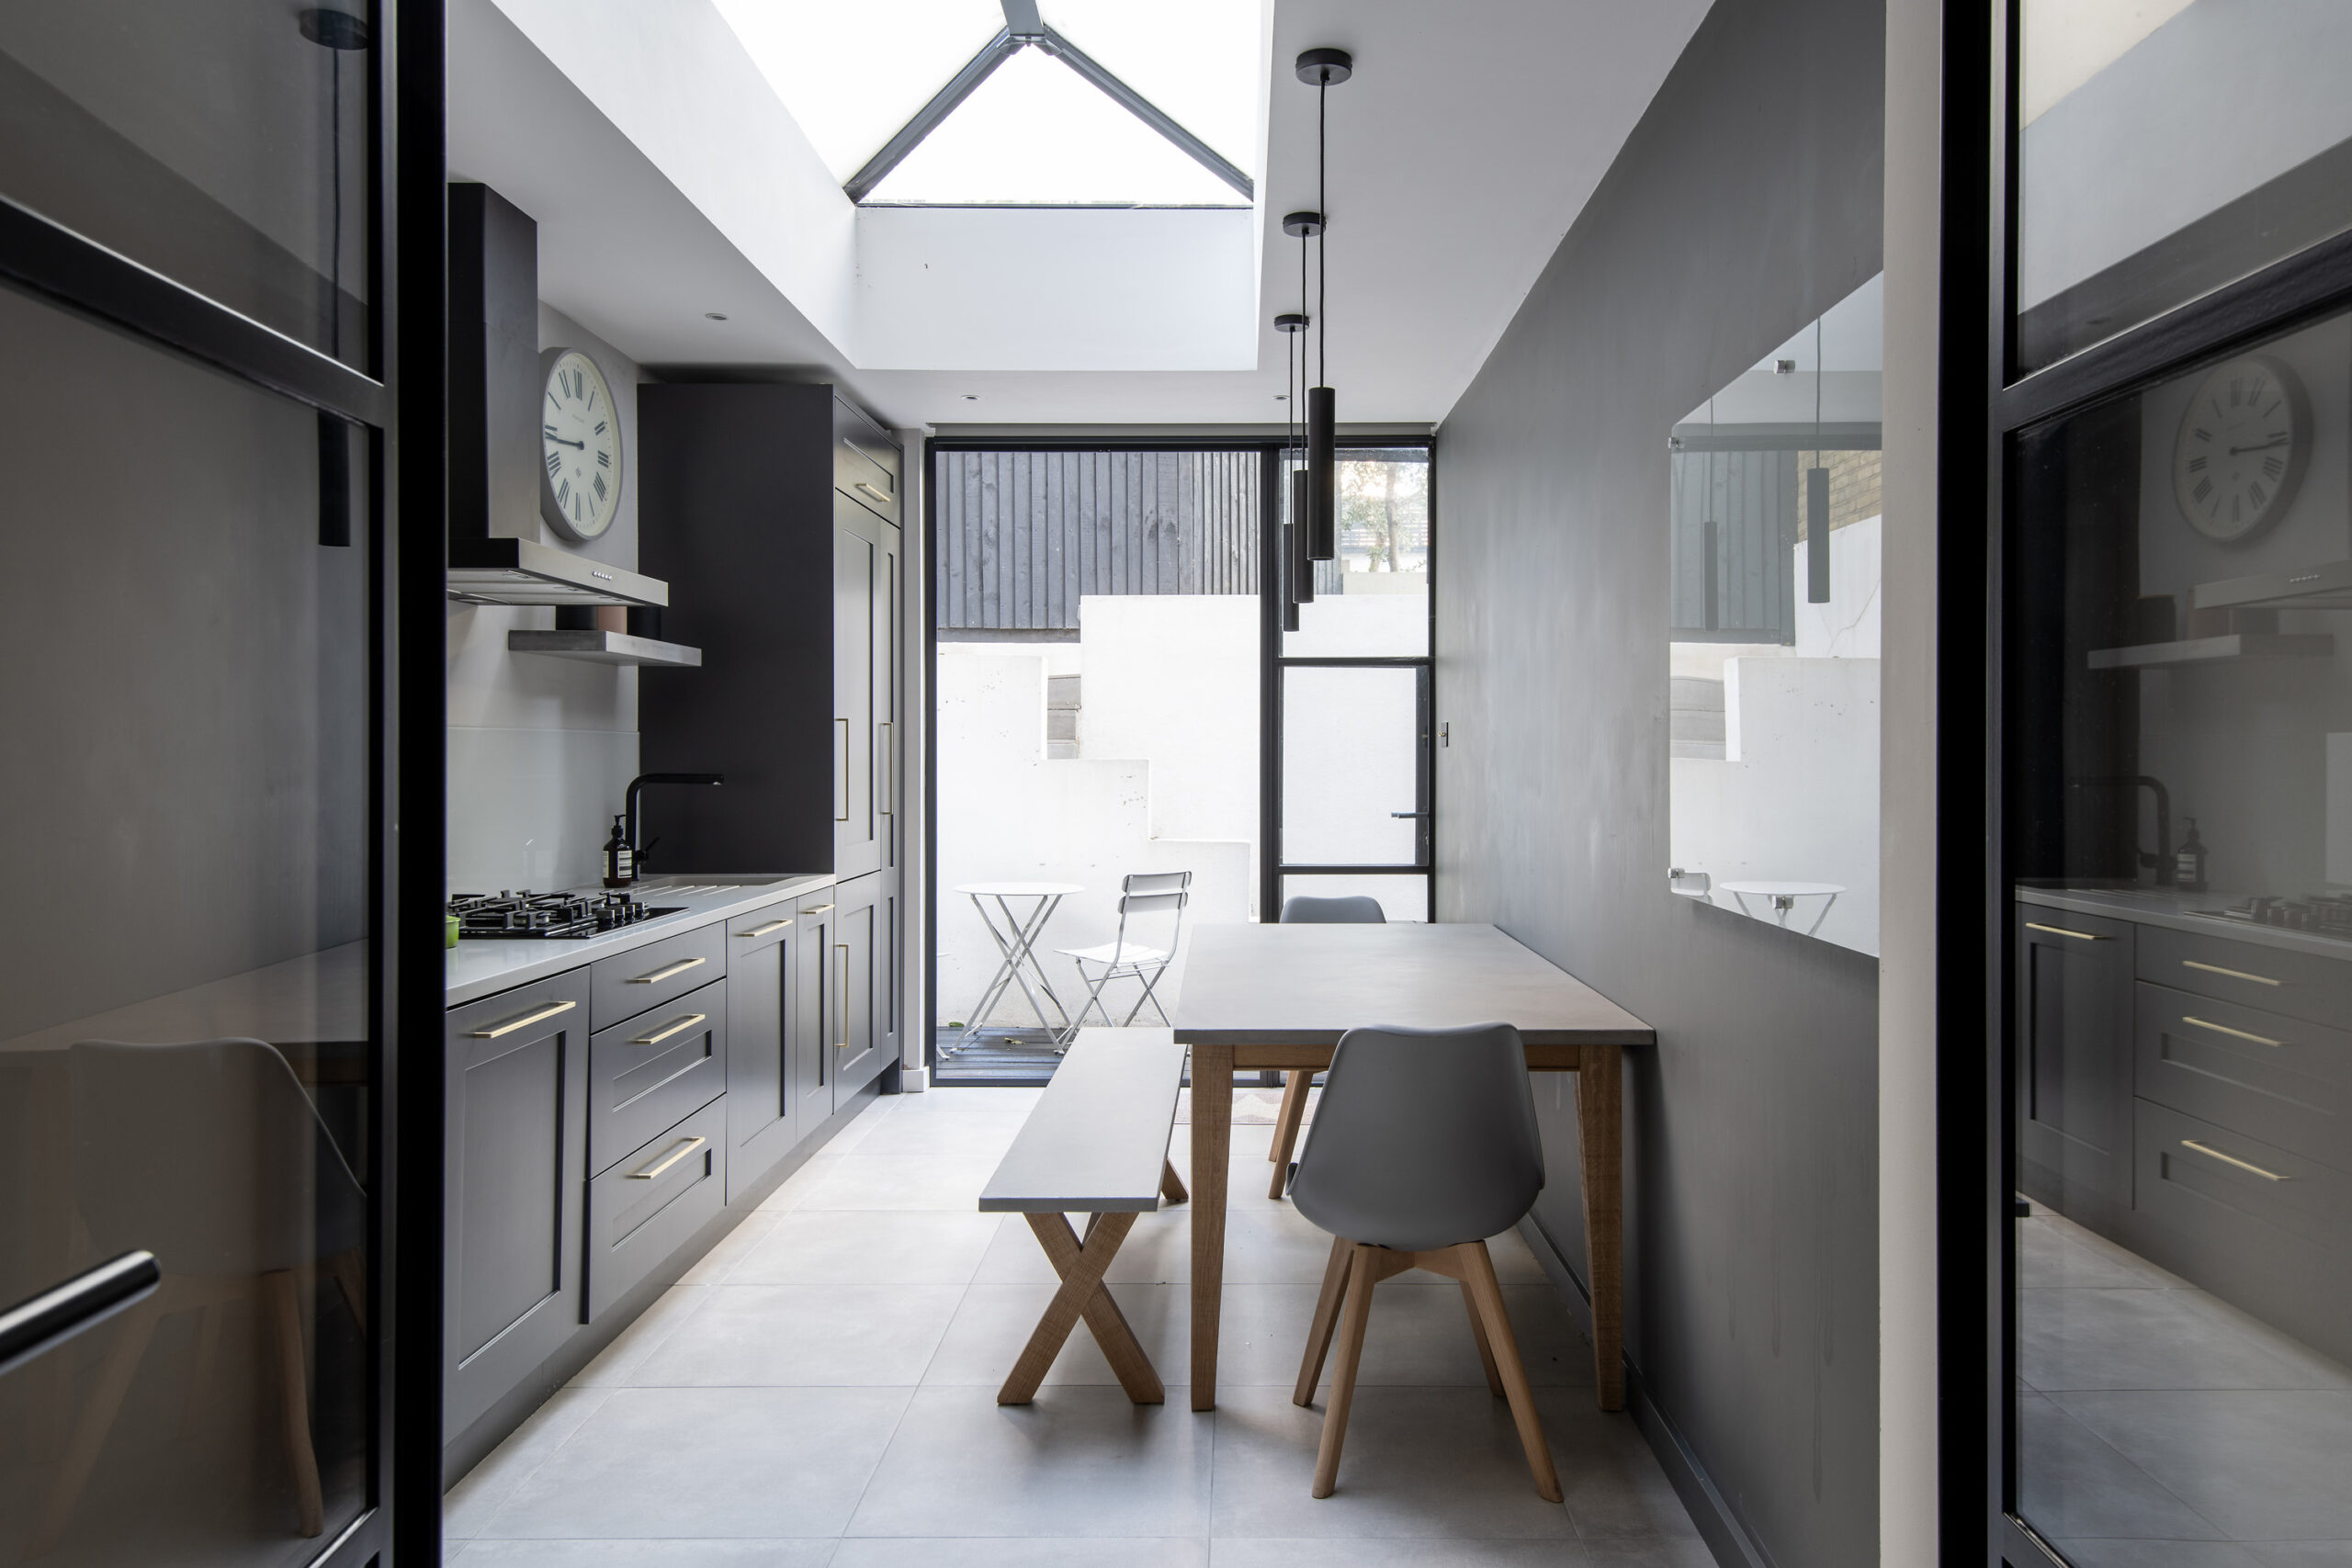 Minimalist style sky-lit kitchen in a two-bedroom apartment for sale in Notting Hill